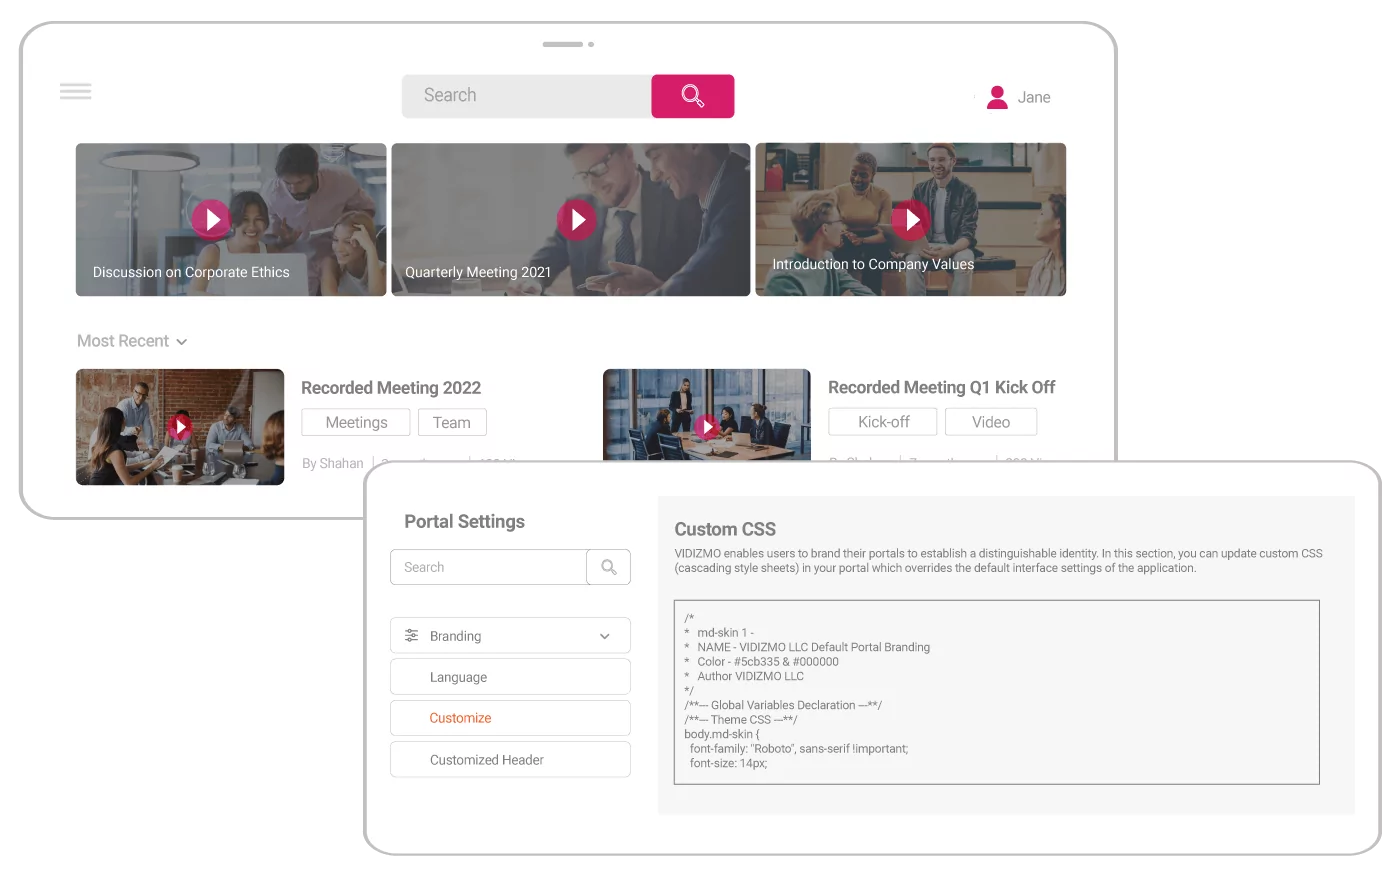 Redesign Video Portal for Customized Experience